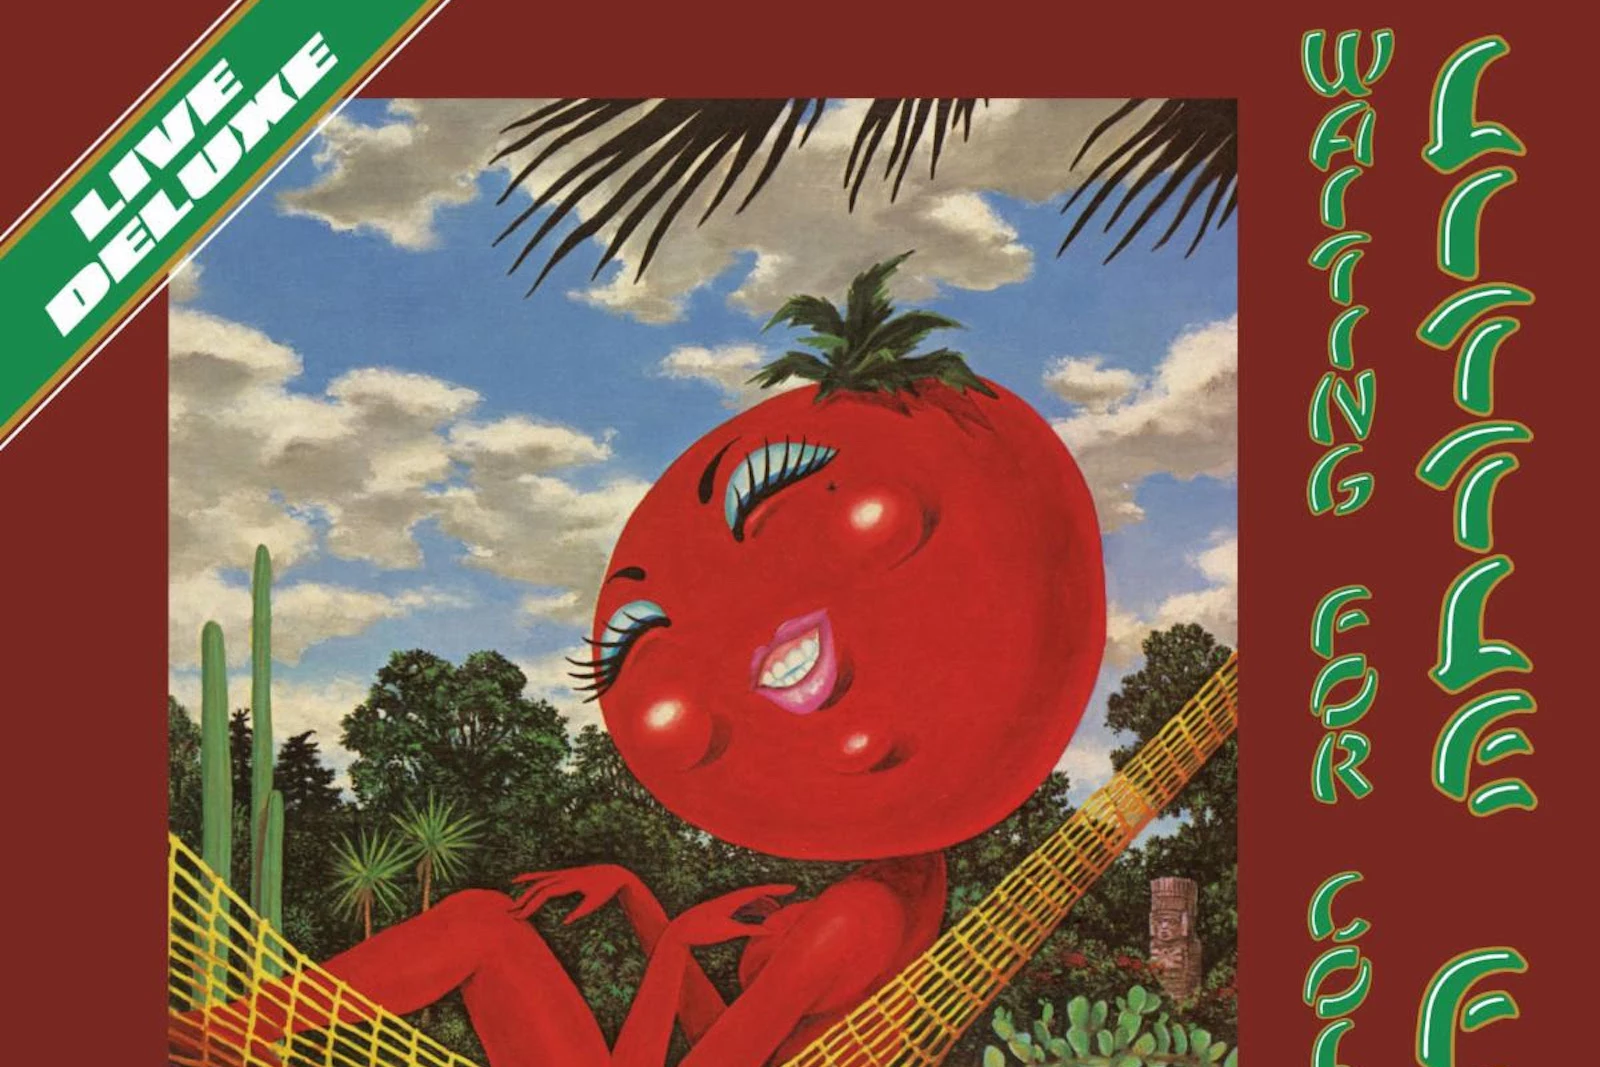 Little Feat Announce Deluxe Edition of ‘Waiting for Columbus’